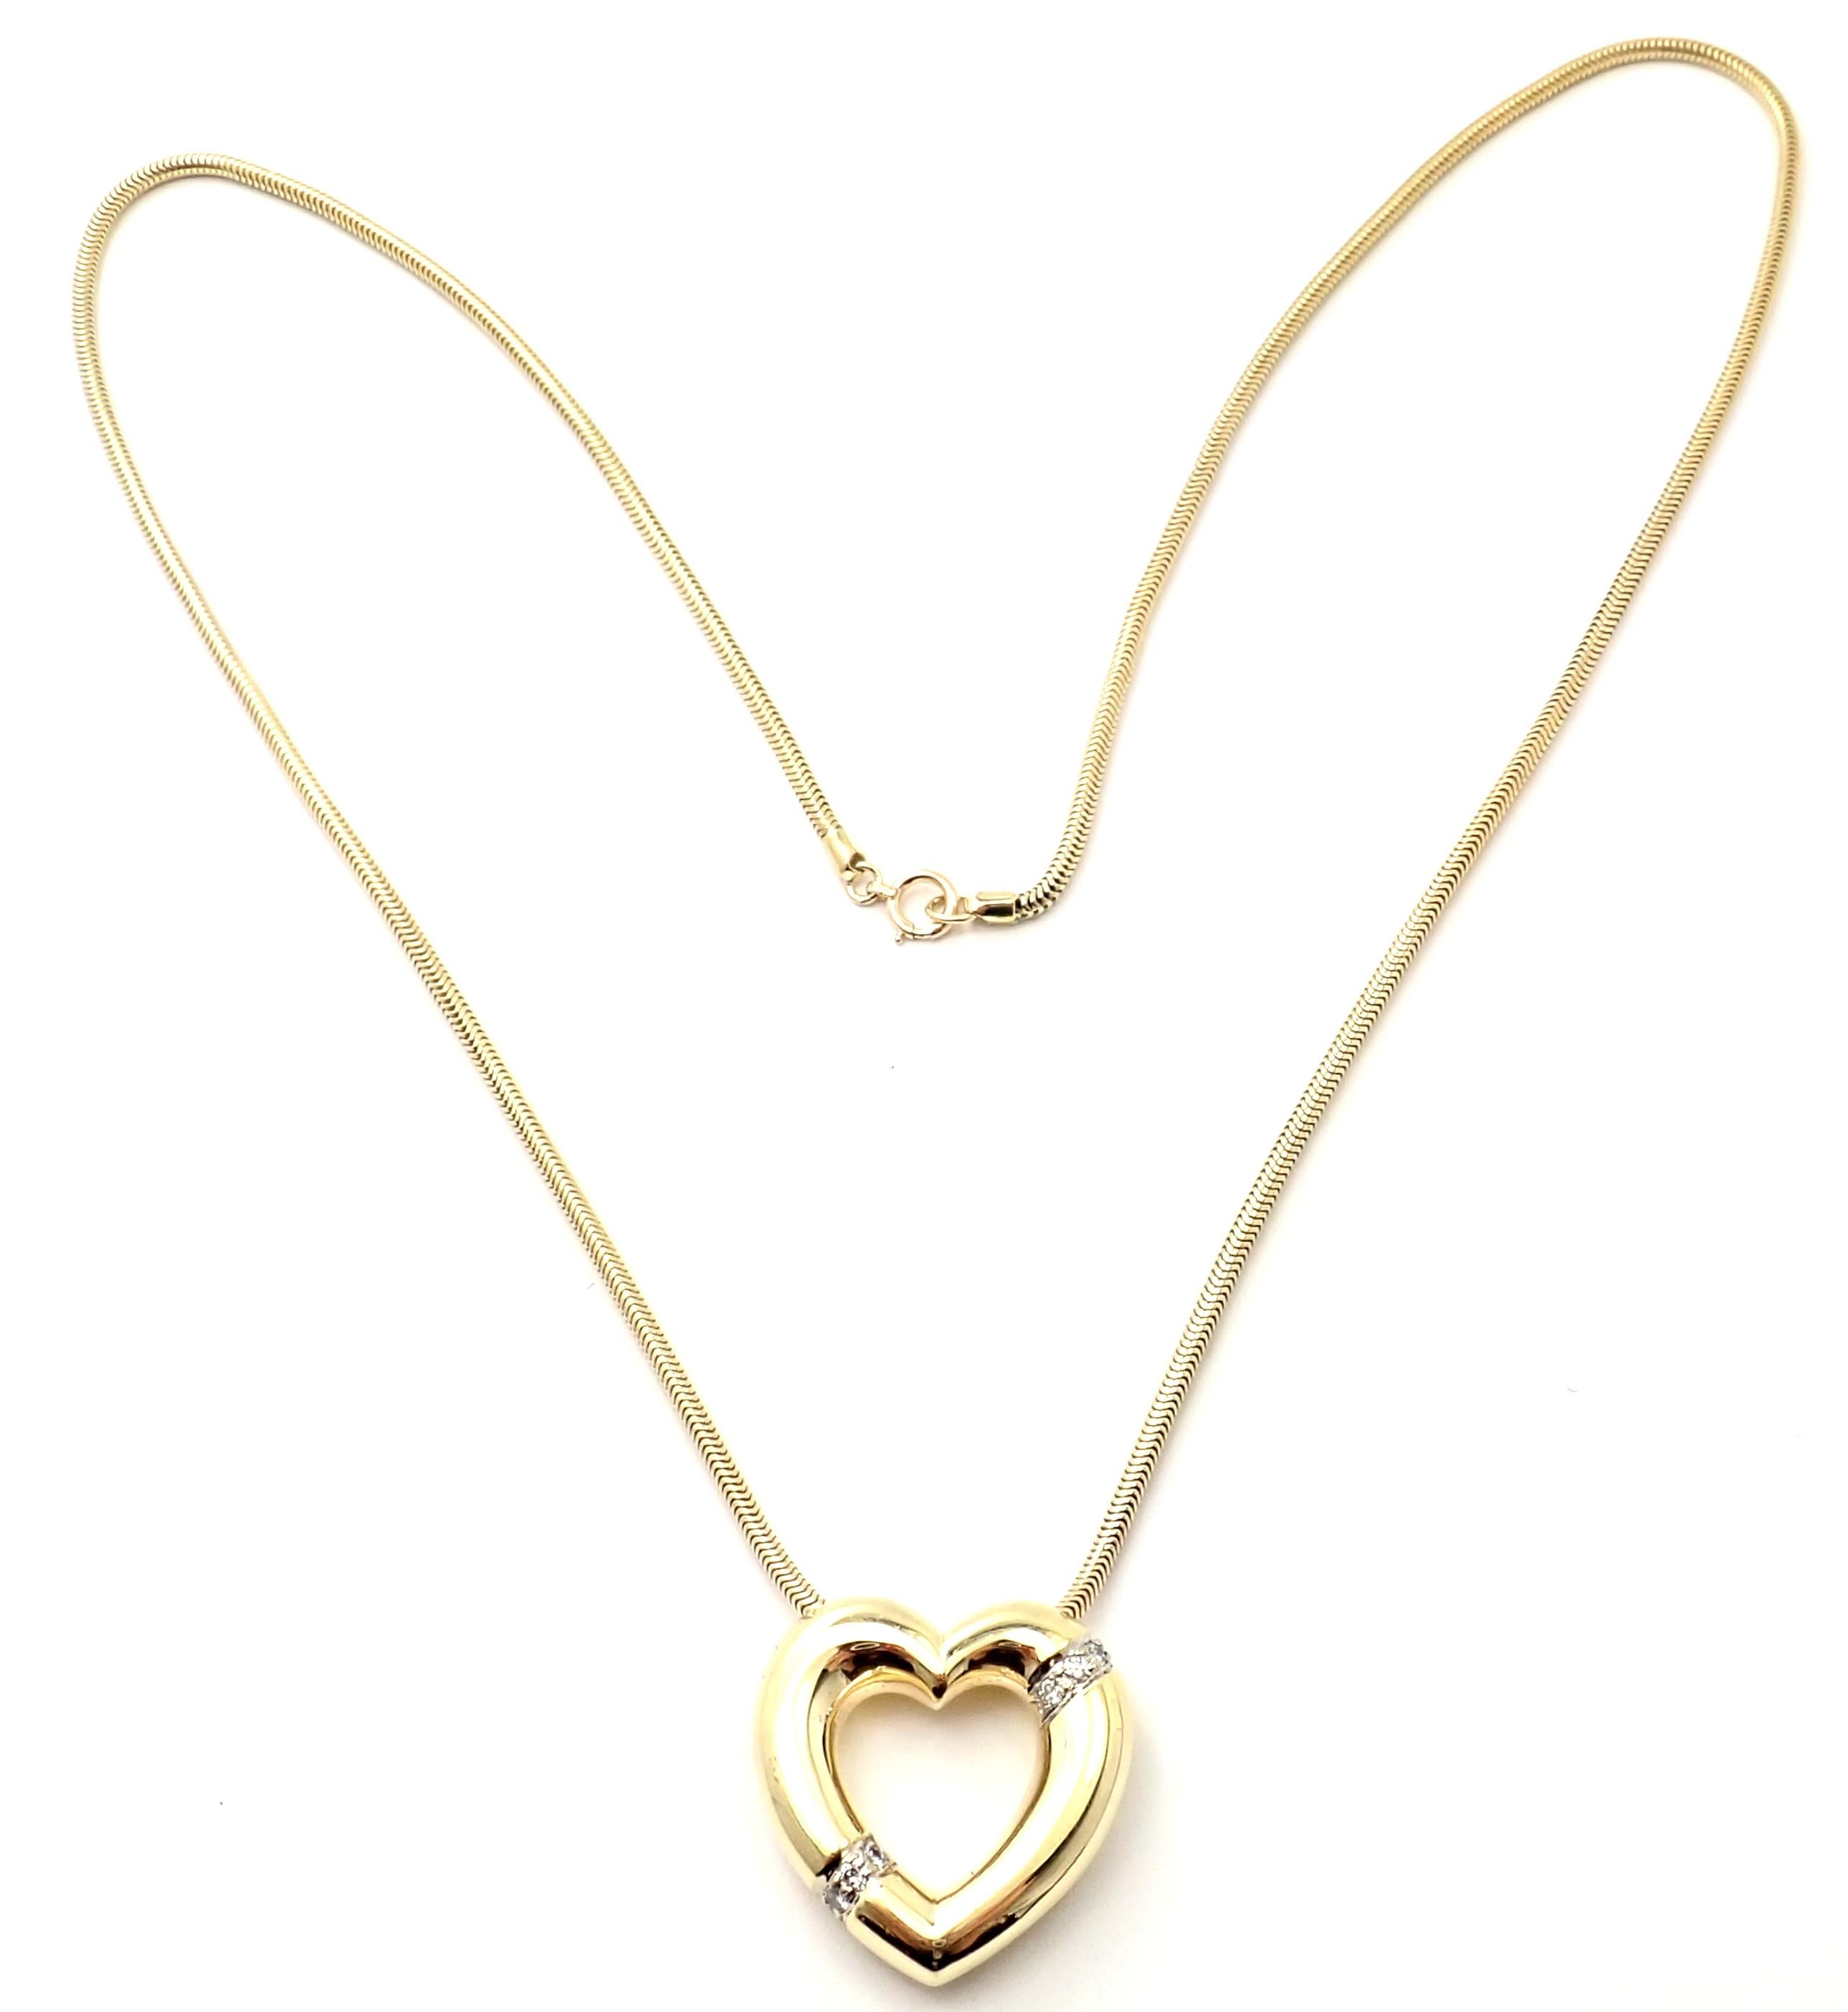 Tiffany & Co. Paloma Picasso Diamond Heart Yellow Gold Pendant Necklace For Sale 2